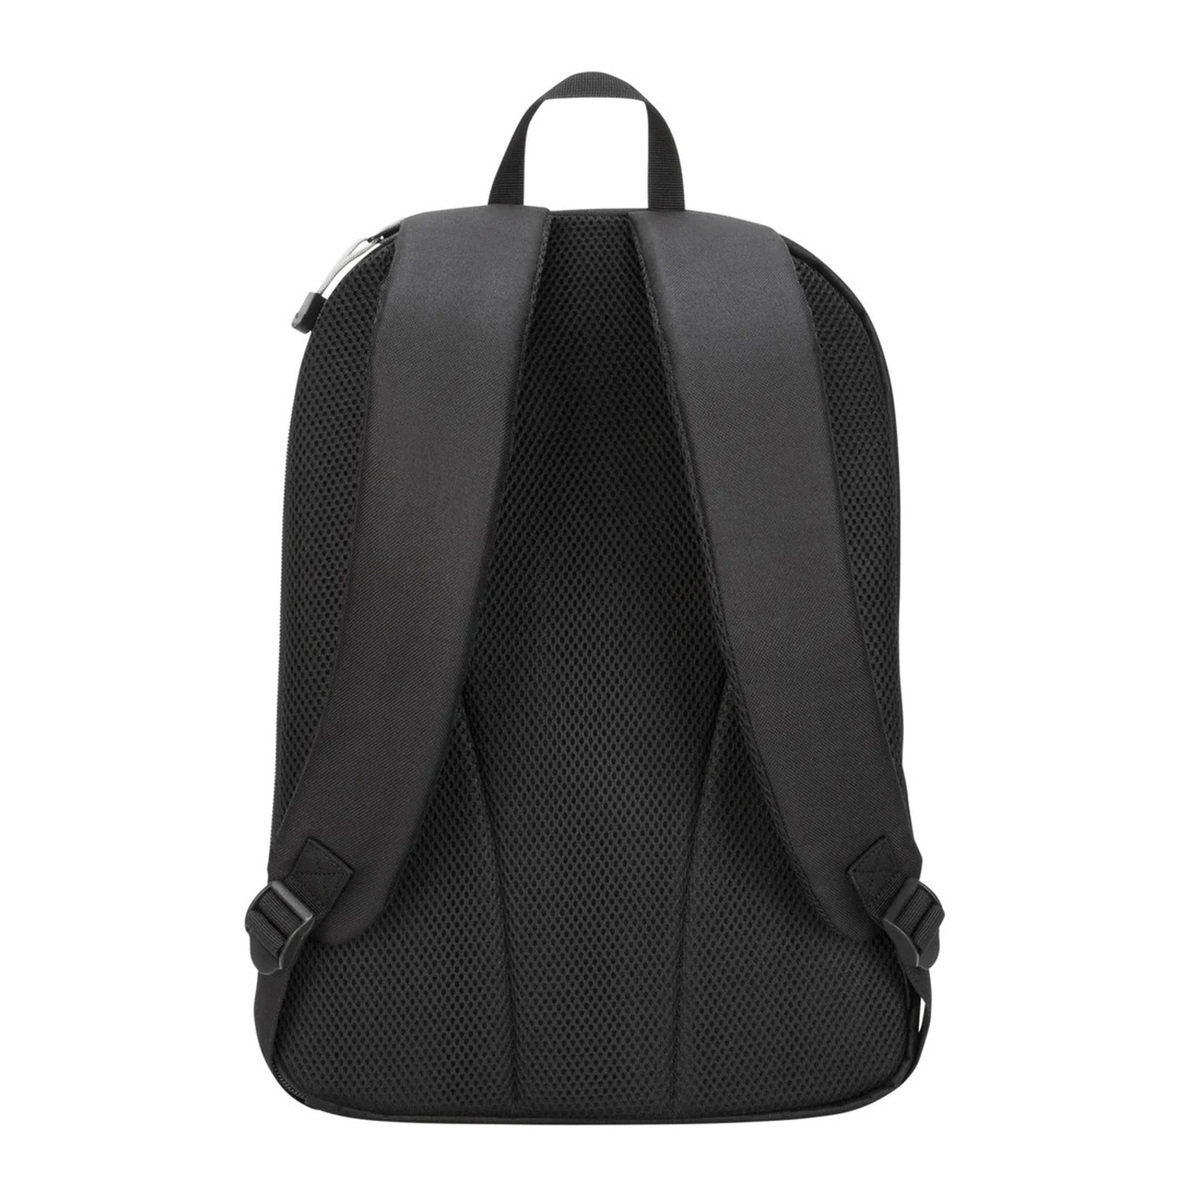 Targus Intellect Laptop Backpack, 15.6 Inch 15.6inch,TSB966GL